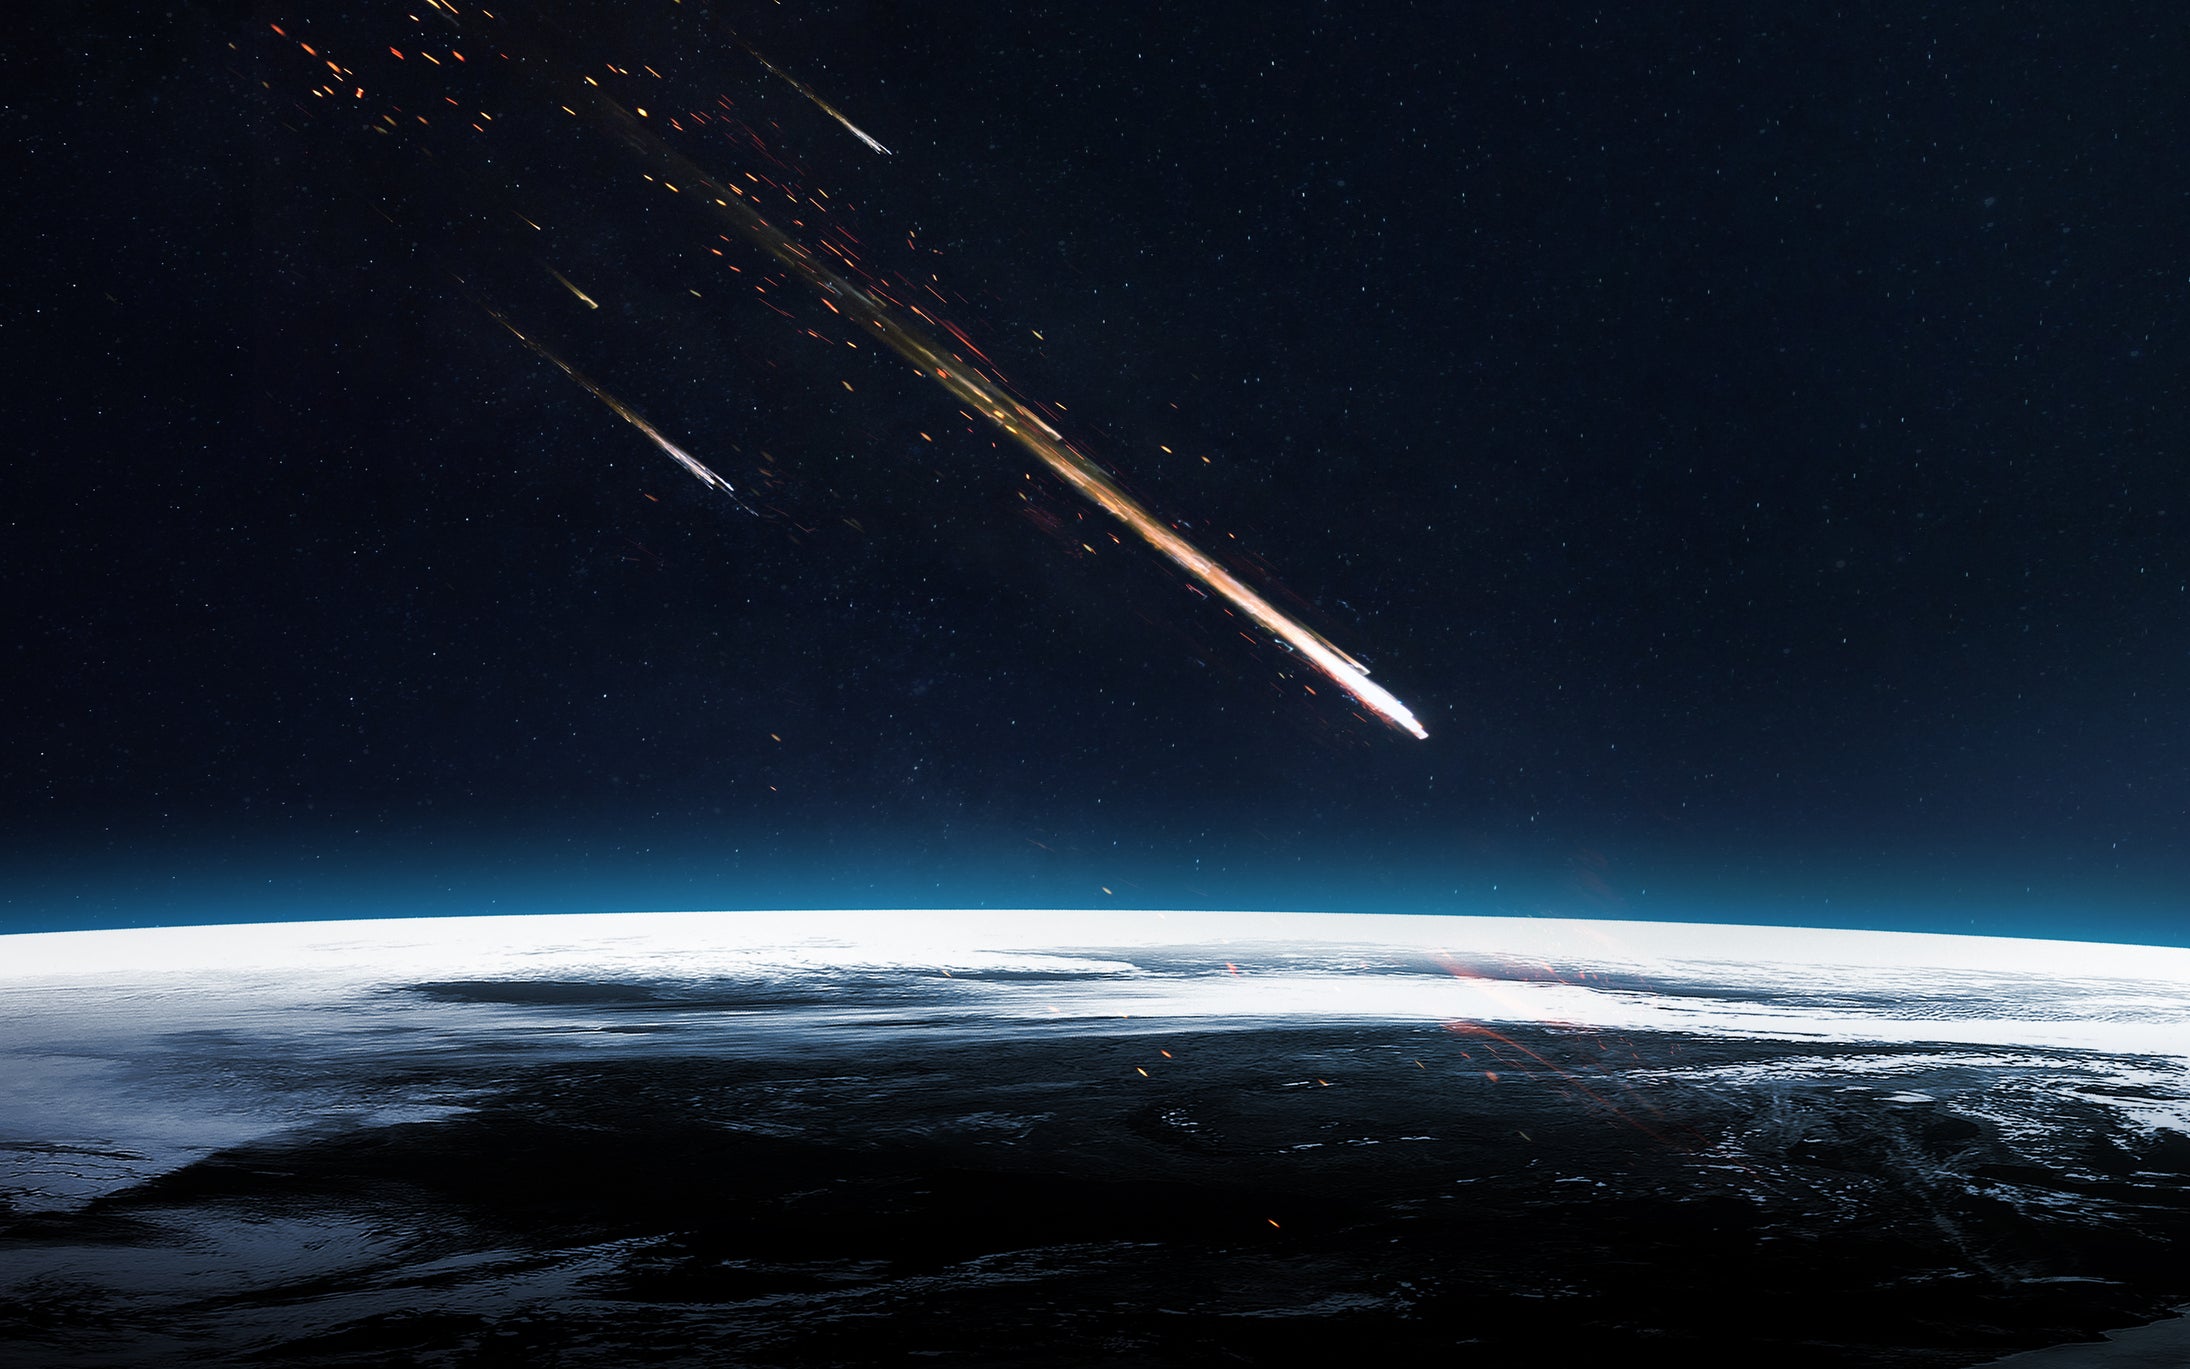 How worried should we really be – and what would happen if an asteroid actually hit us?